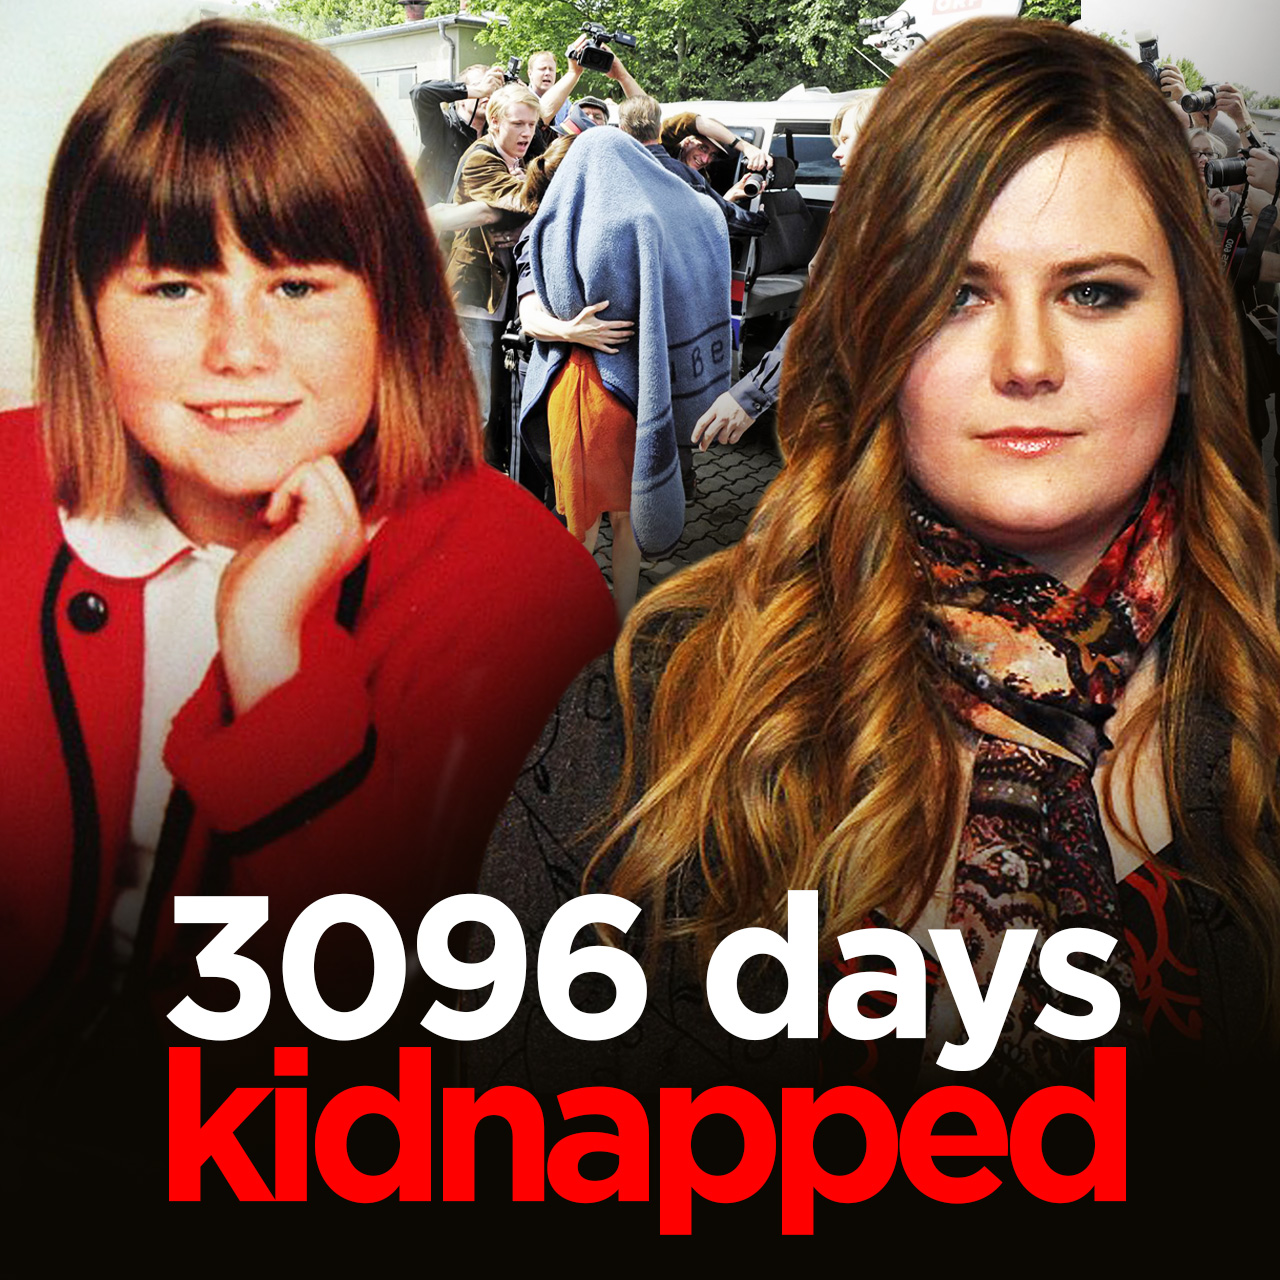 The TERRIBLE 3096 days KIDNAPPING of NATASCHA KAMPUSCH